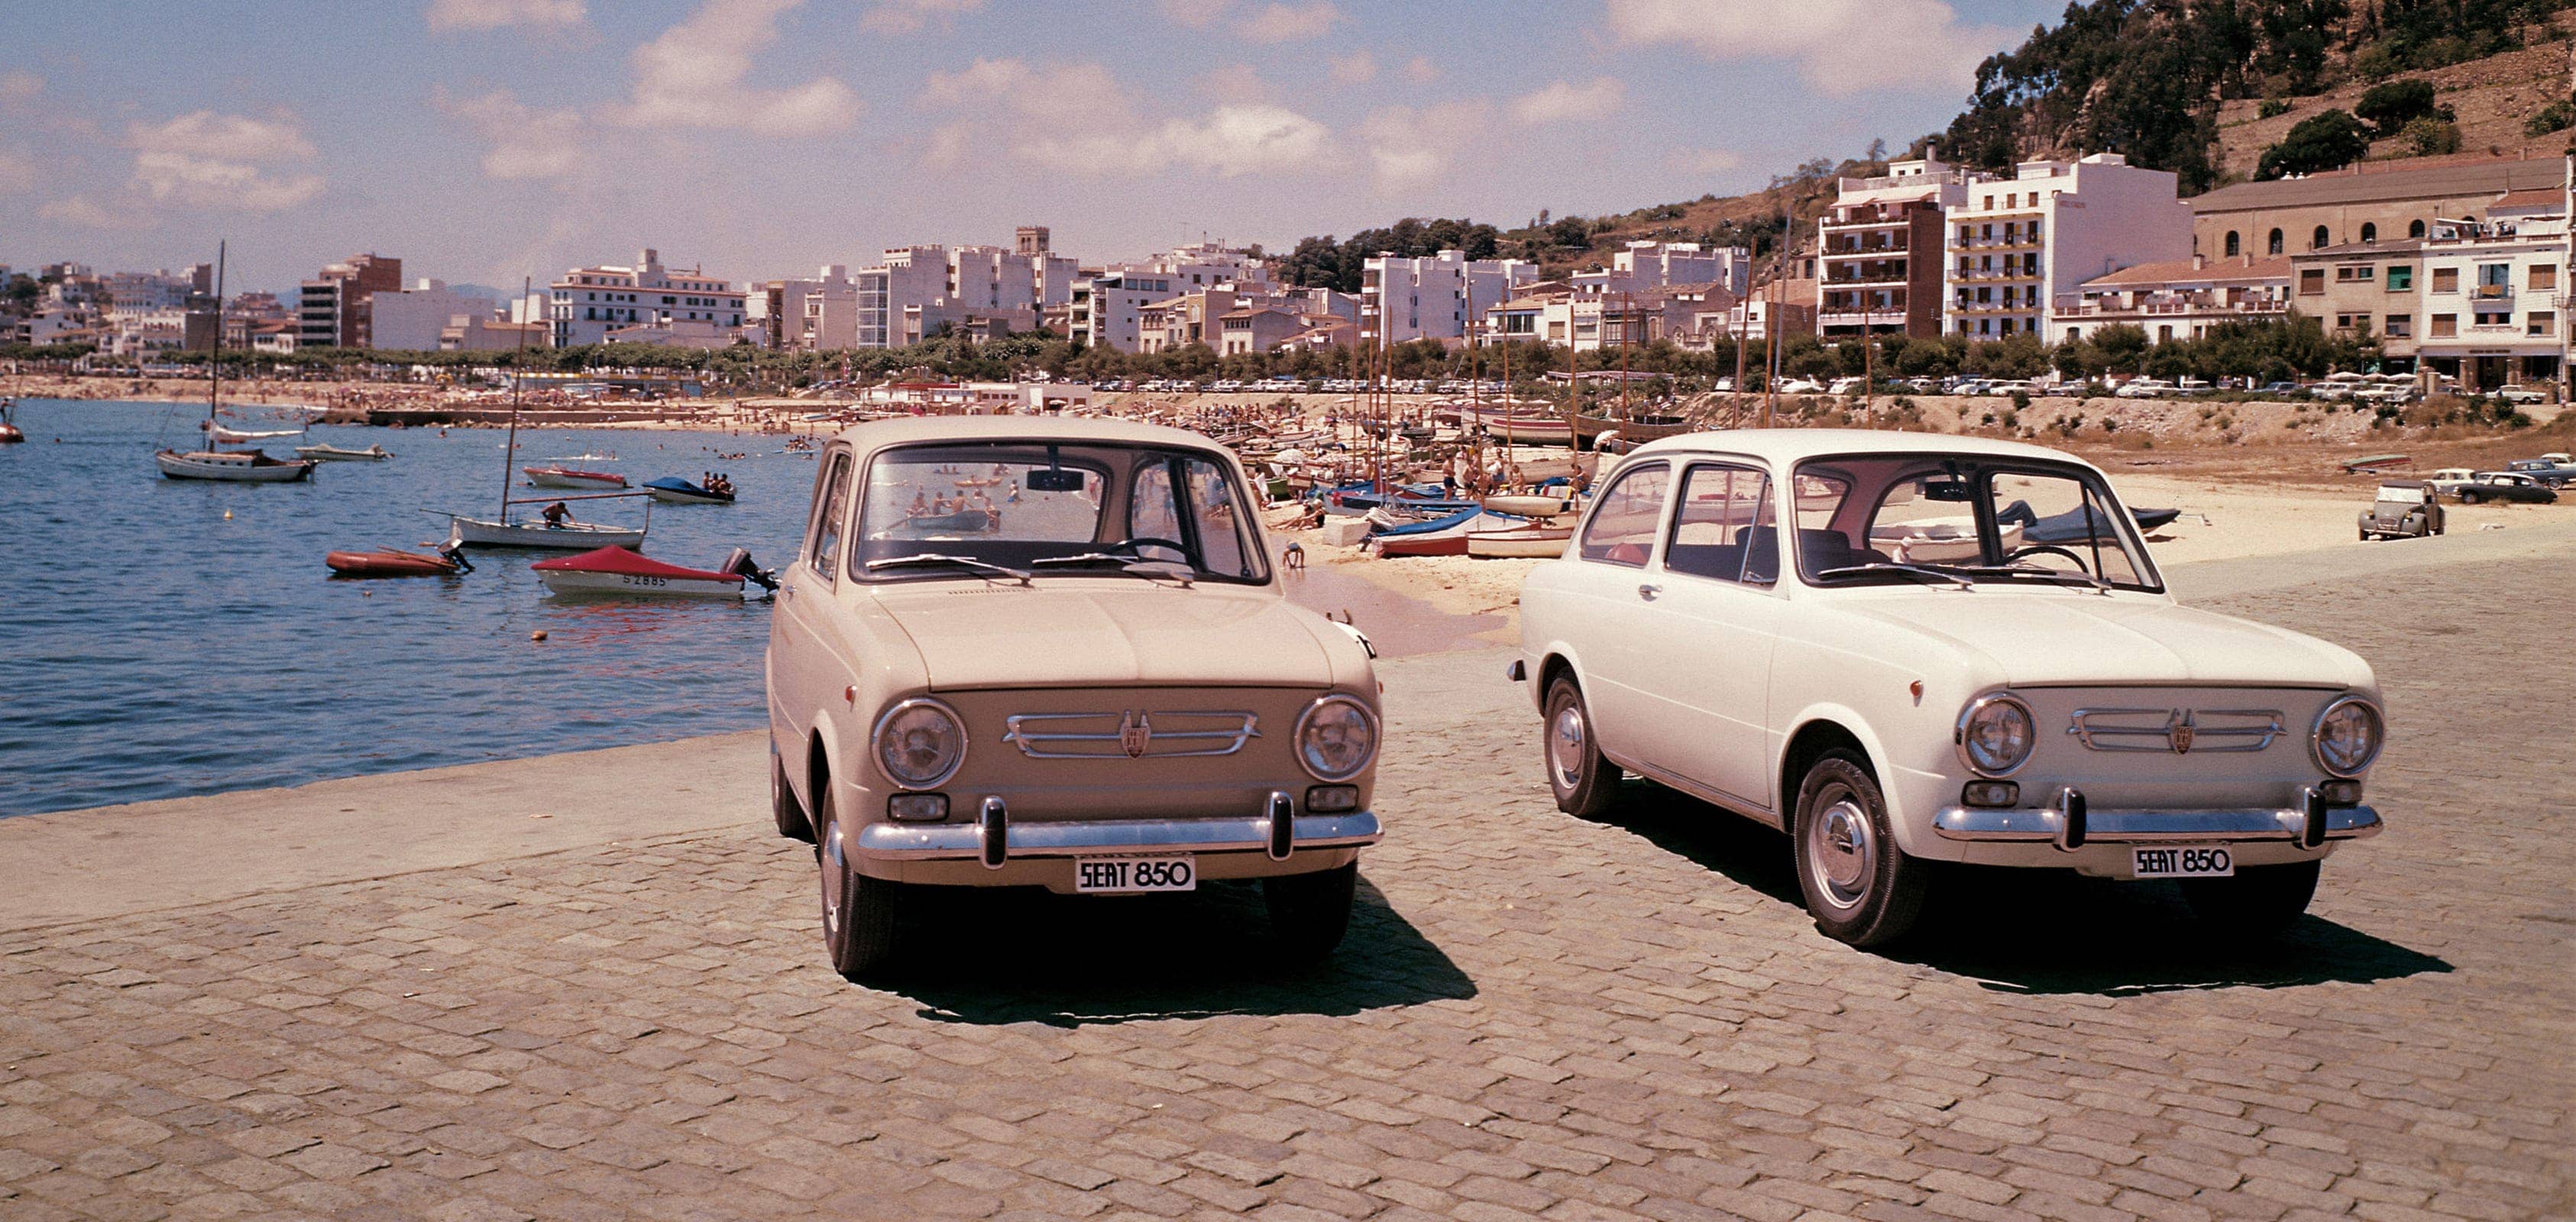 SEAT brand history 1960s exports - SEAT 850 cars on a beach header image